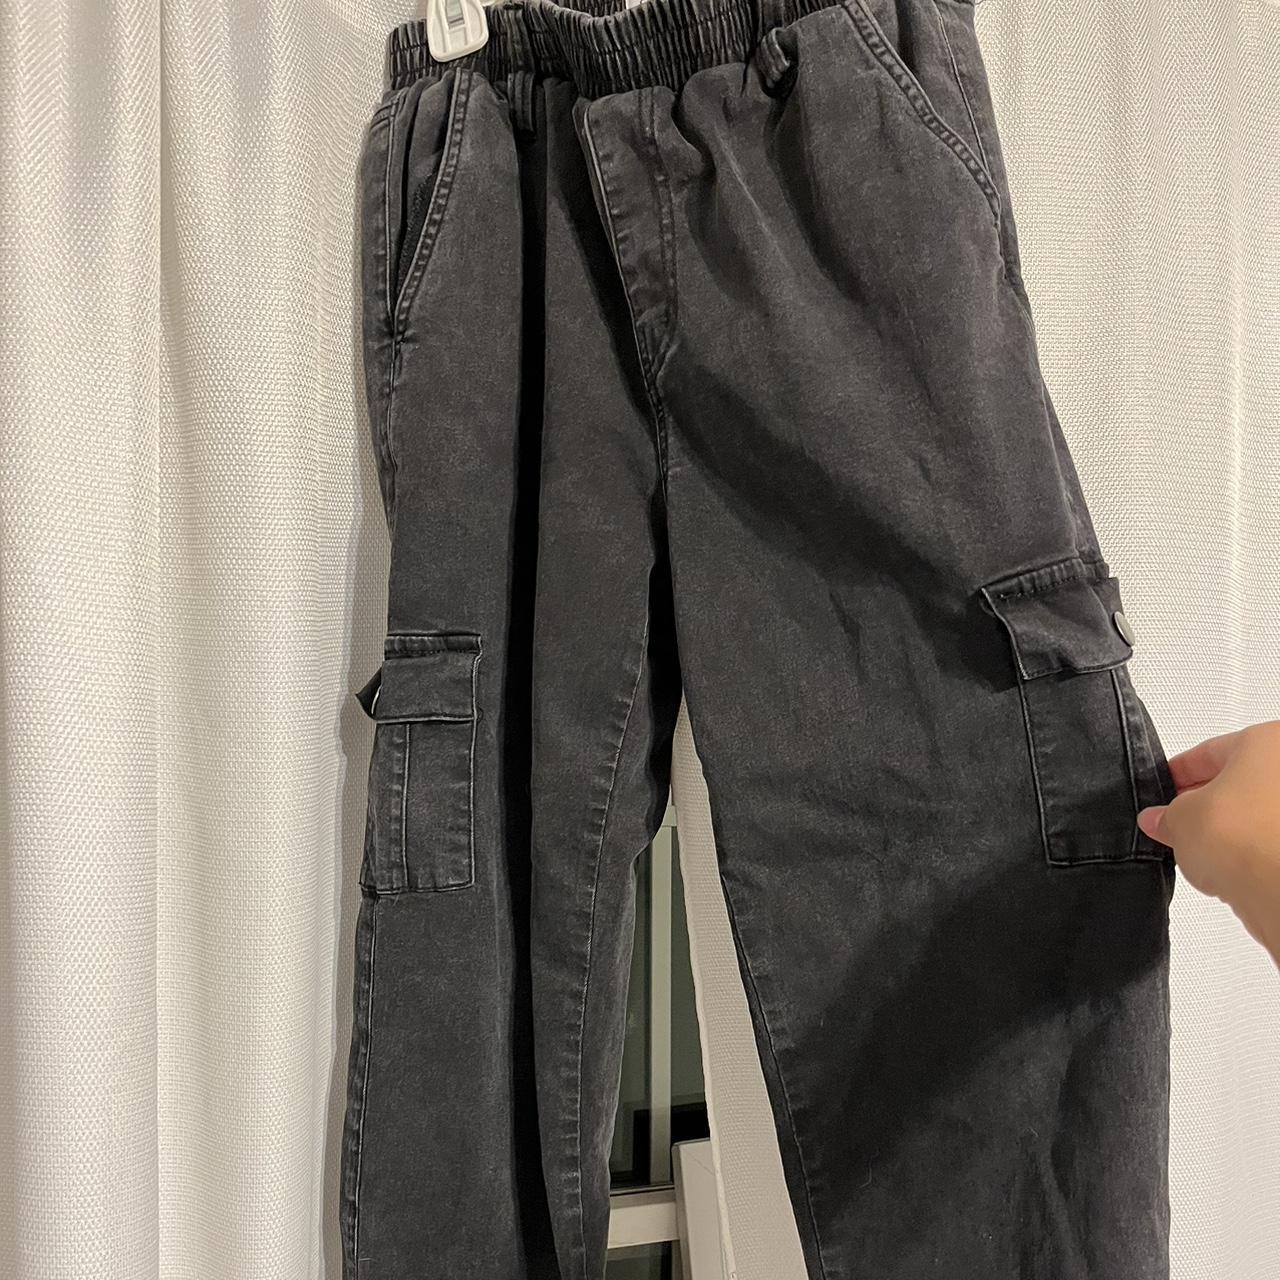 simple society black cargo pants - no flaws - size... - Depop